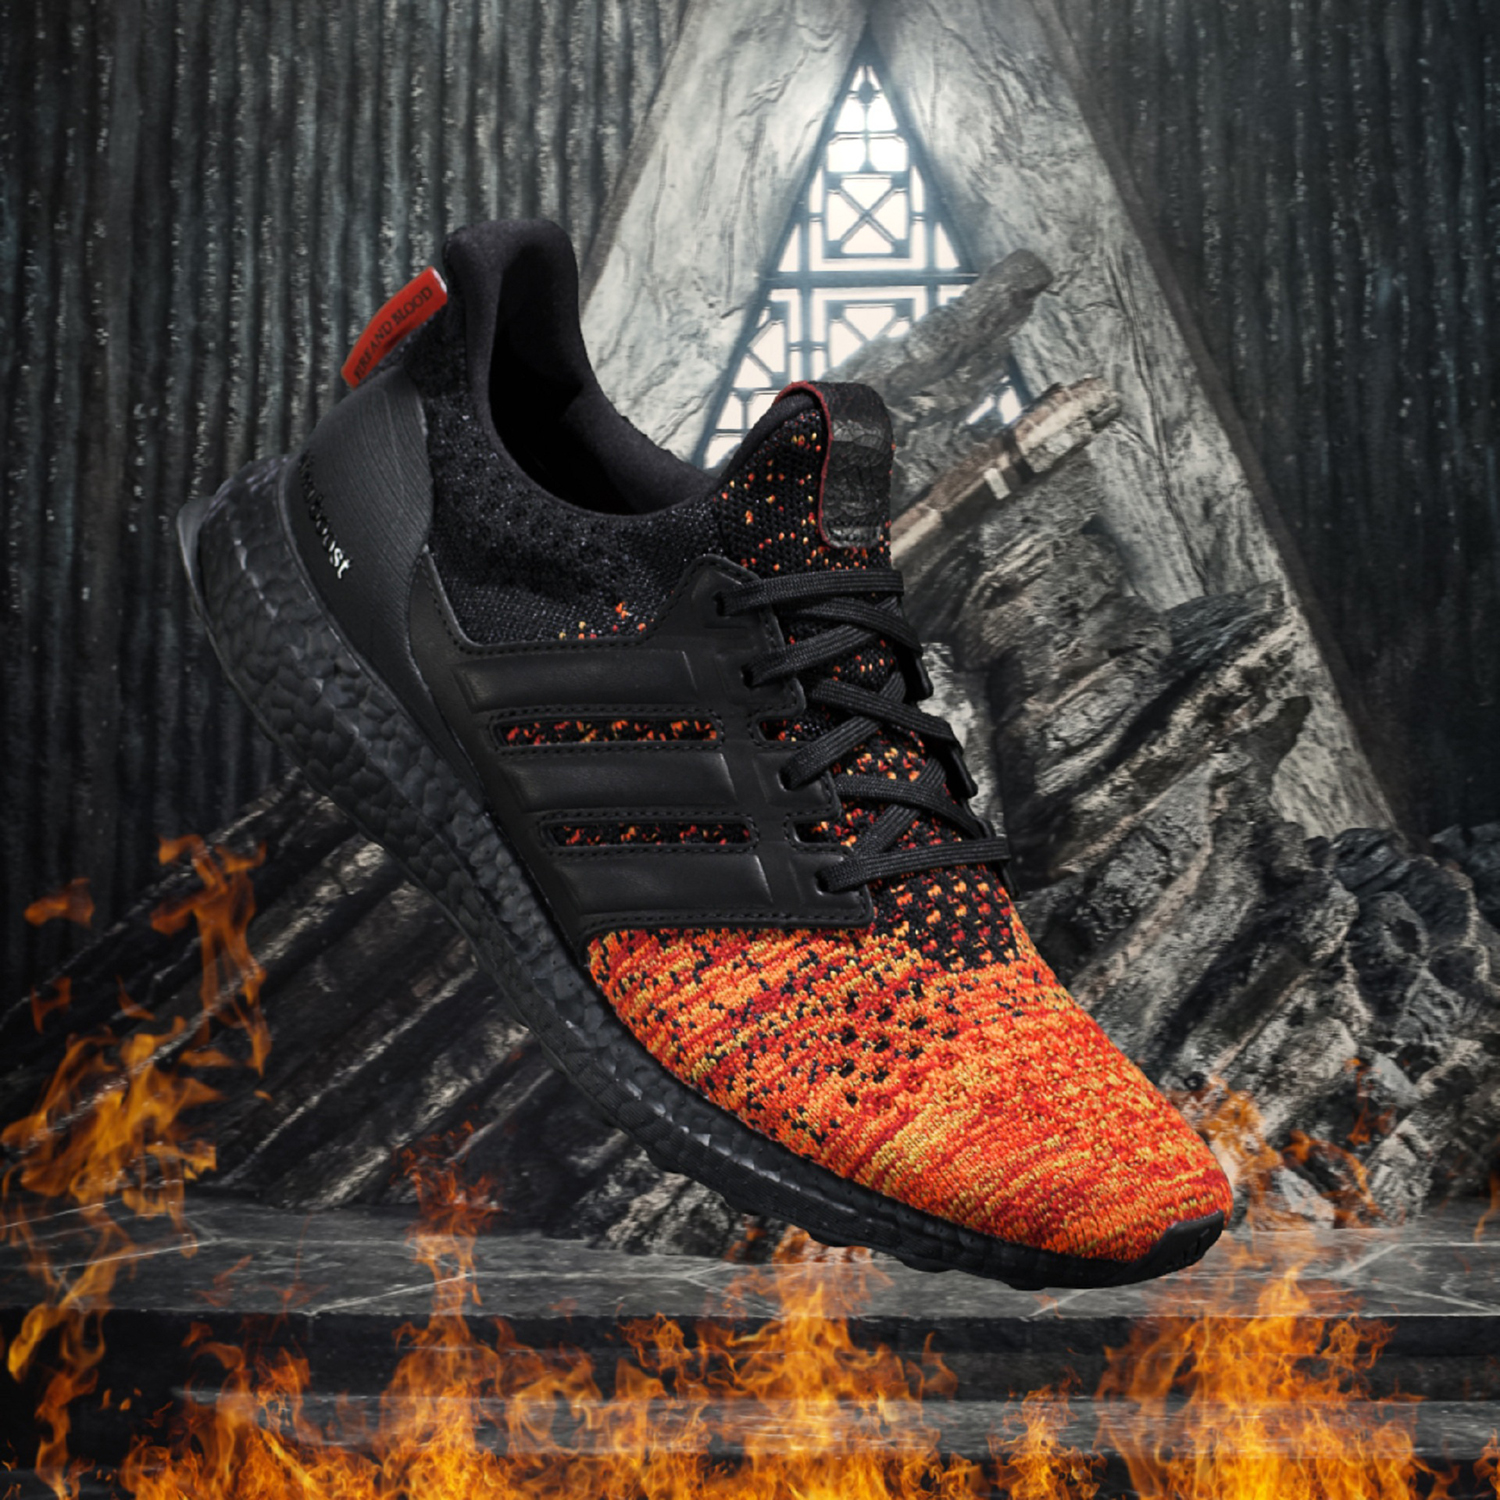 Adidas Finally those Magical Game of Thrones - Manual